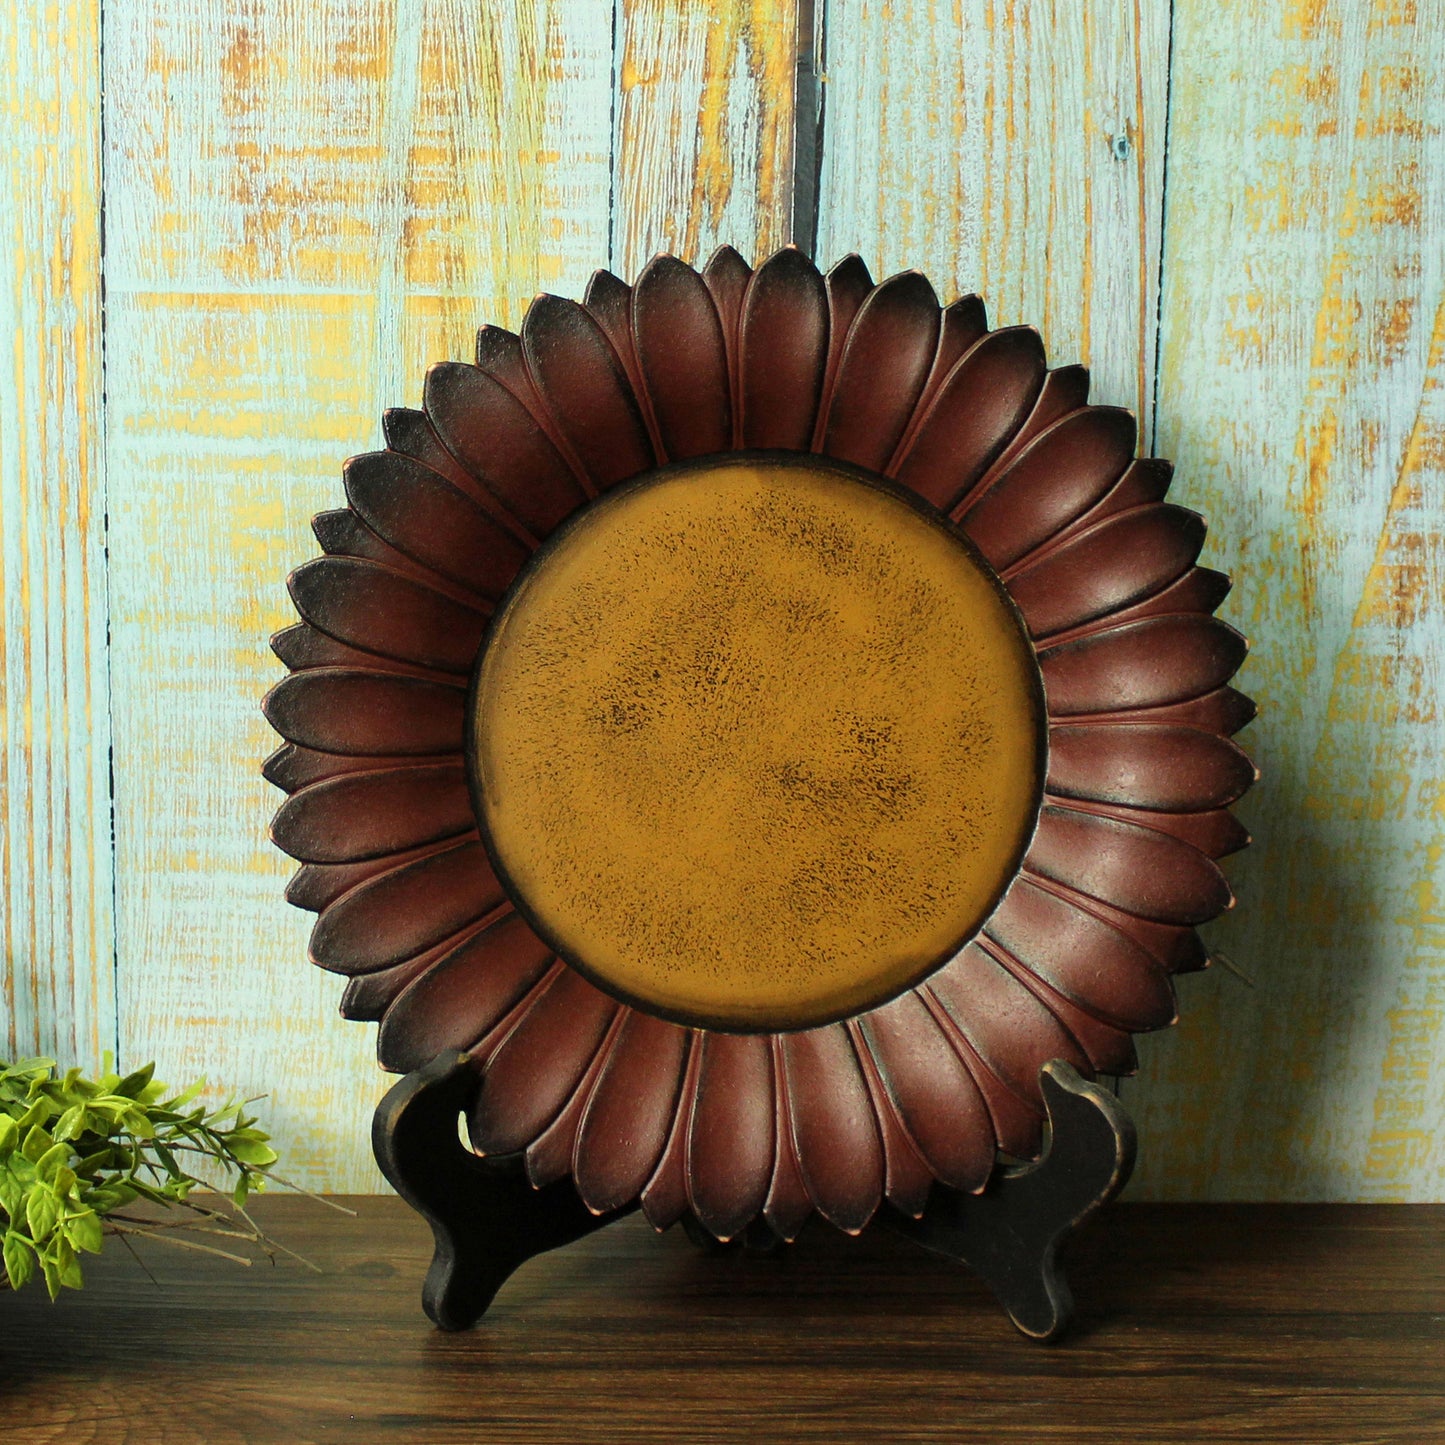 CVHOMEDECO. Sunflower Shape Plate Country Vintage Display Wooden Plate Home and Office Décor Art, 11 Inch